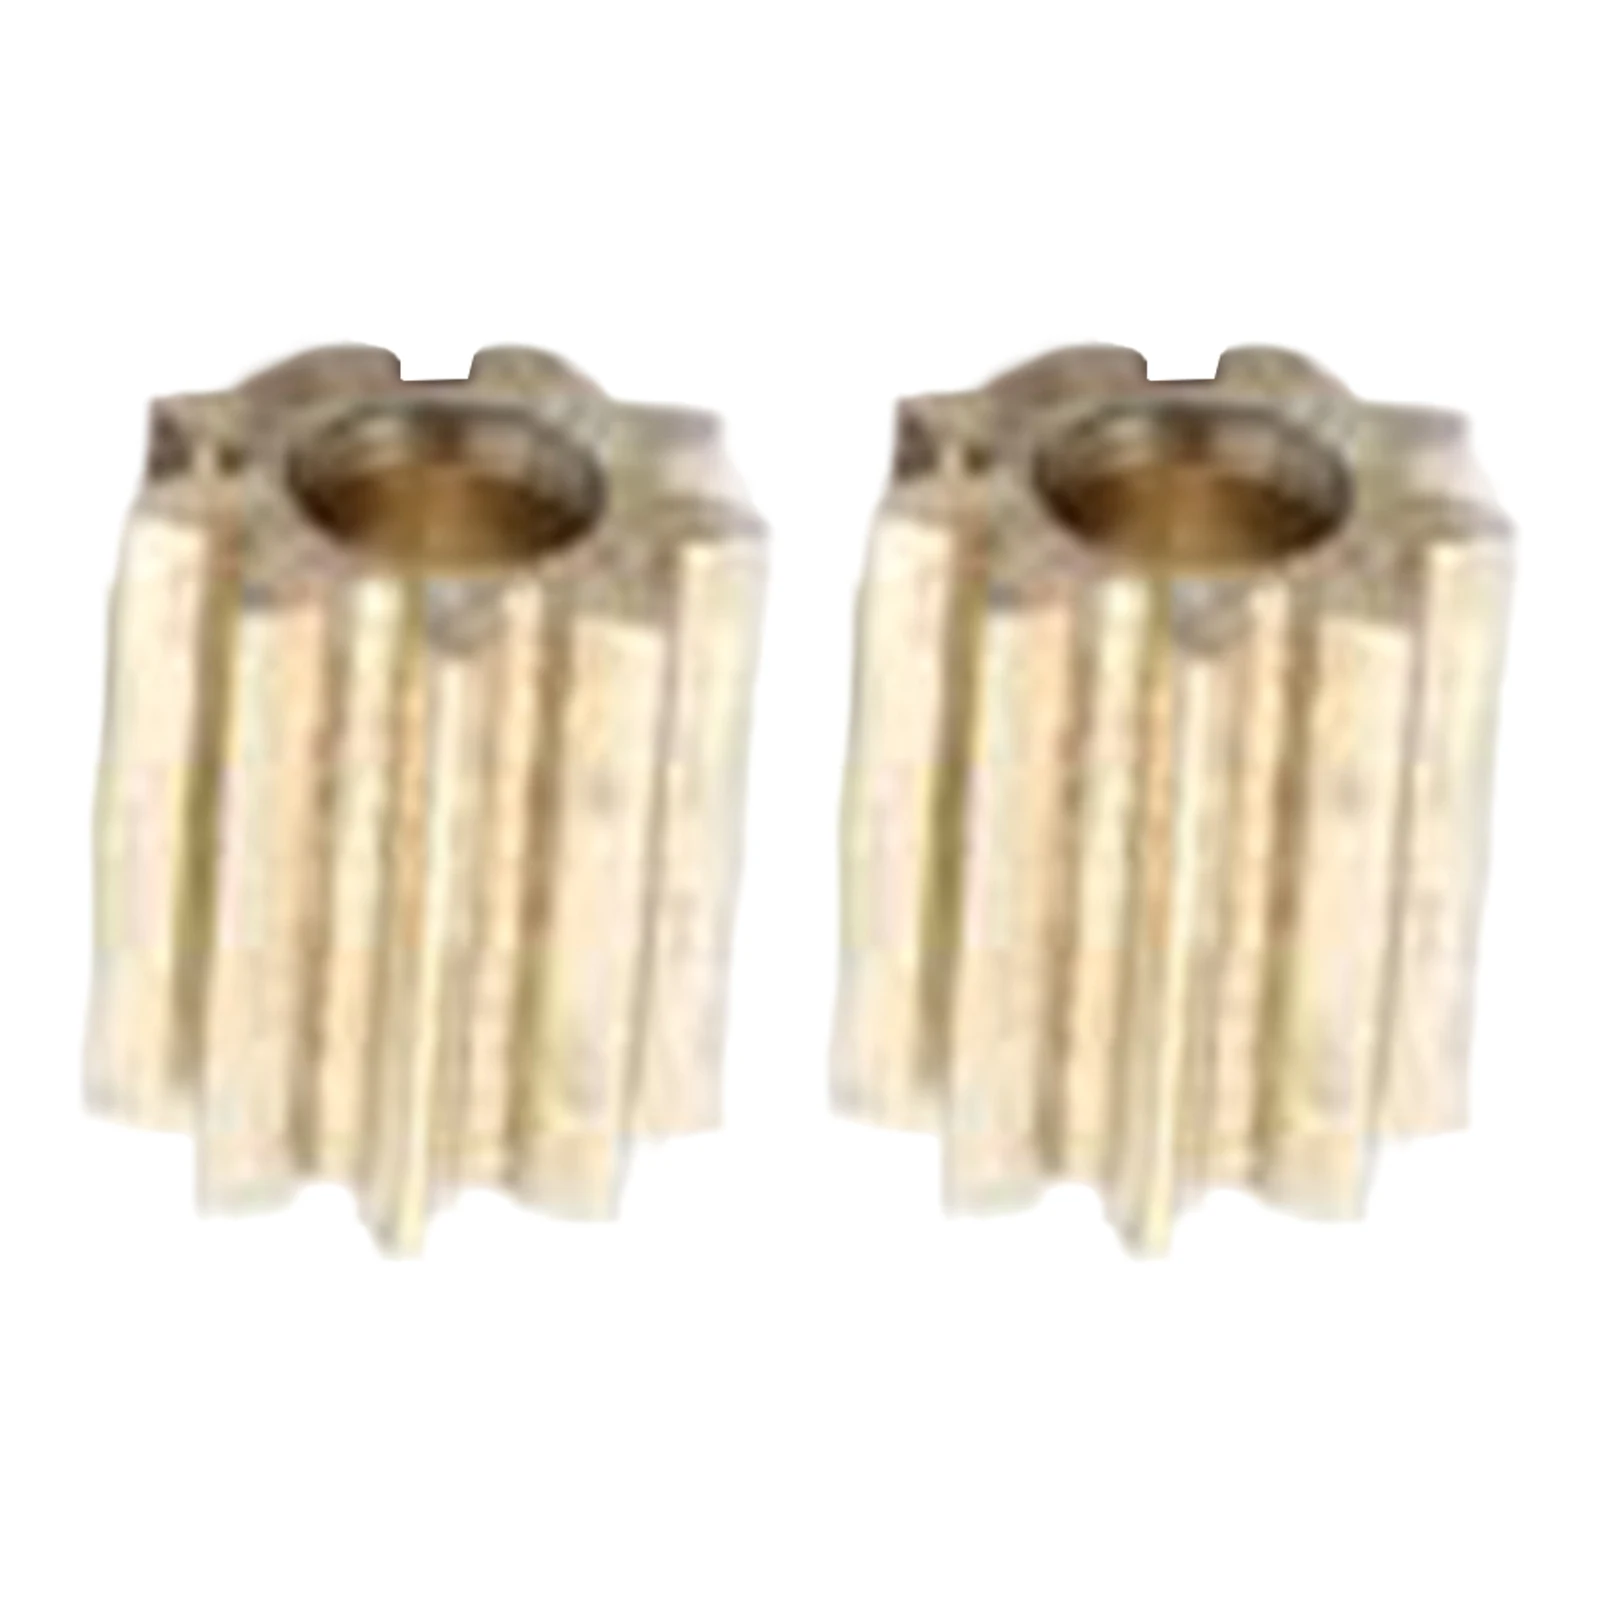 2x Motor Pinion Gear Set, Durable Brass, Fit for Module 0.4 9 ,  Replacement